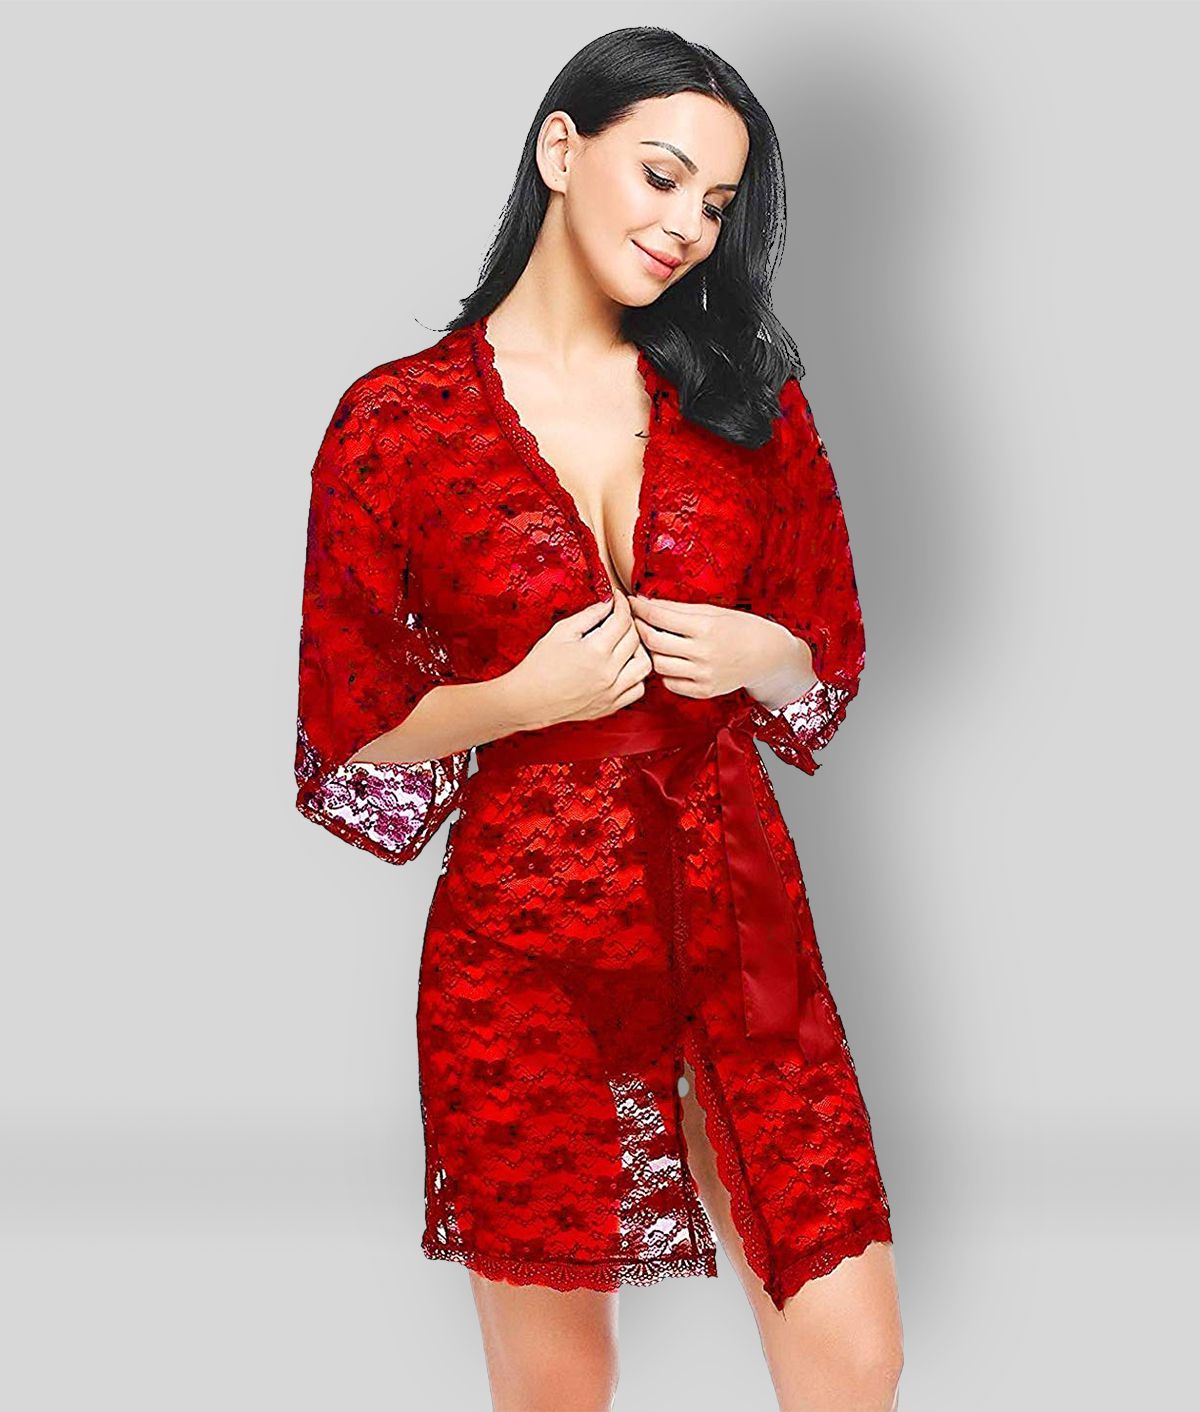     			Celosia - Red Lace Women's Nightwear Baby Doll Dresses Without Panty ( Pack of 1 )